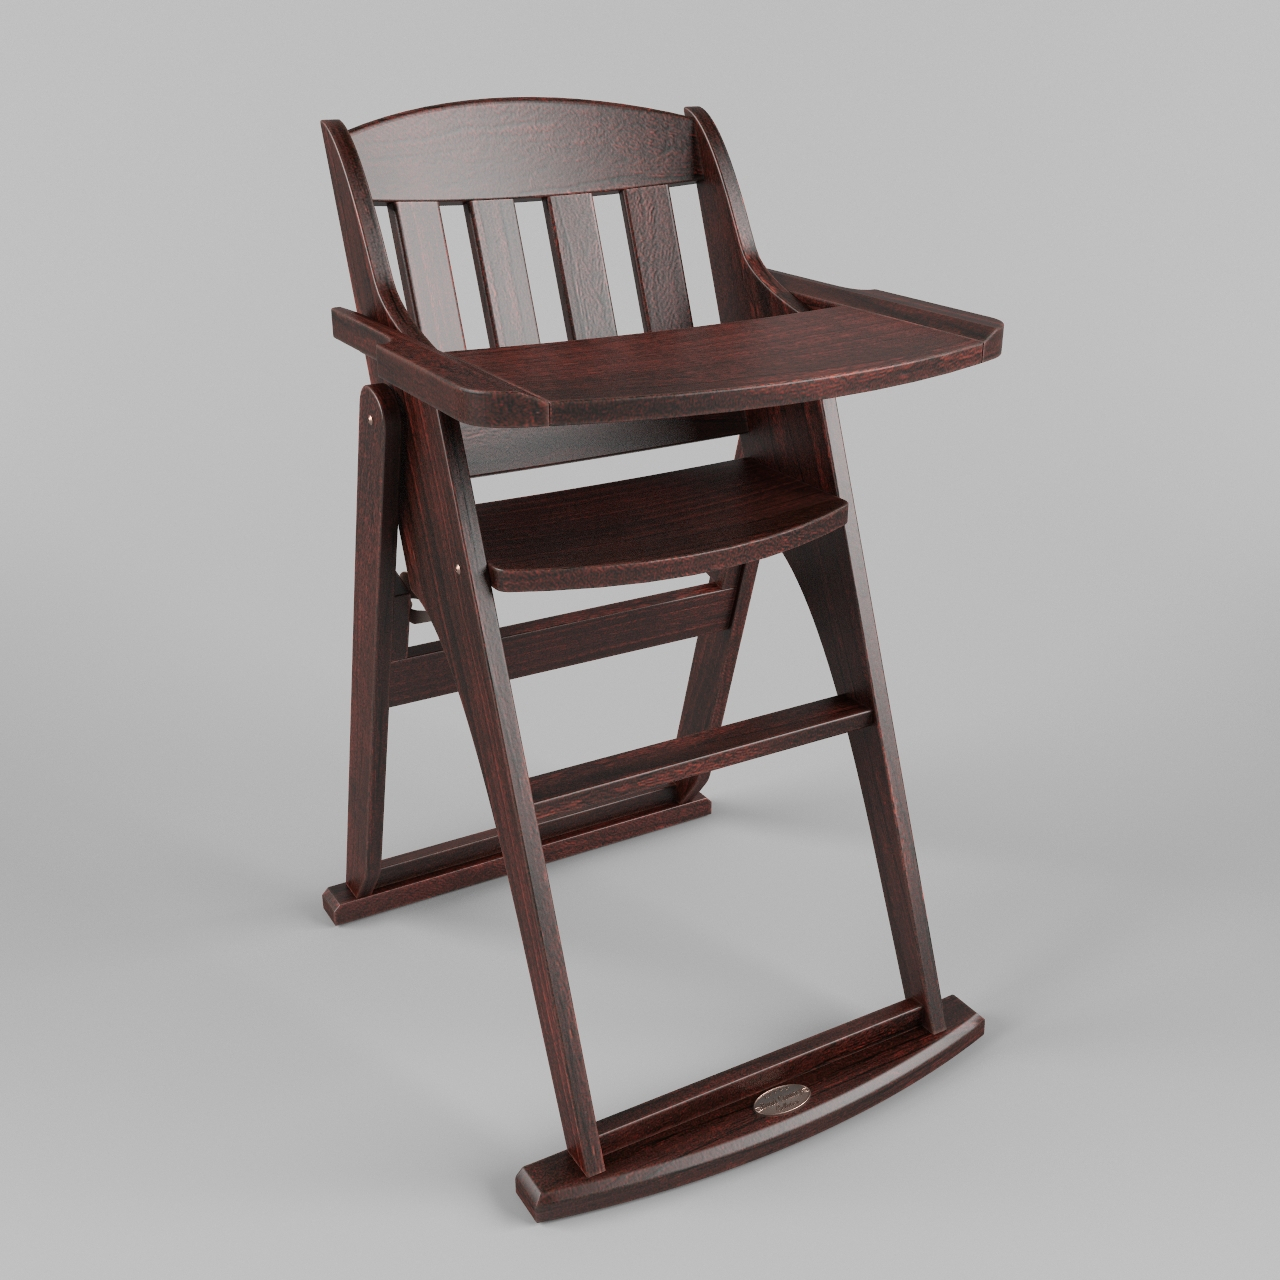 Chair for child 01 4